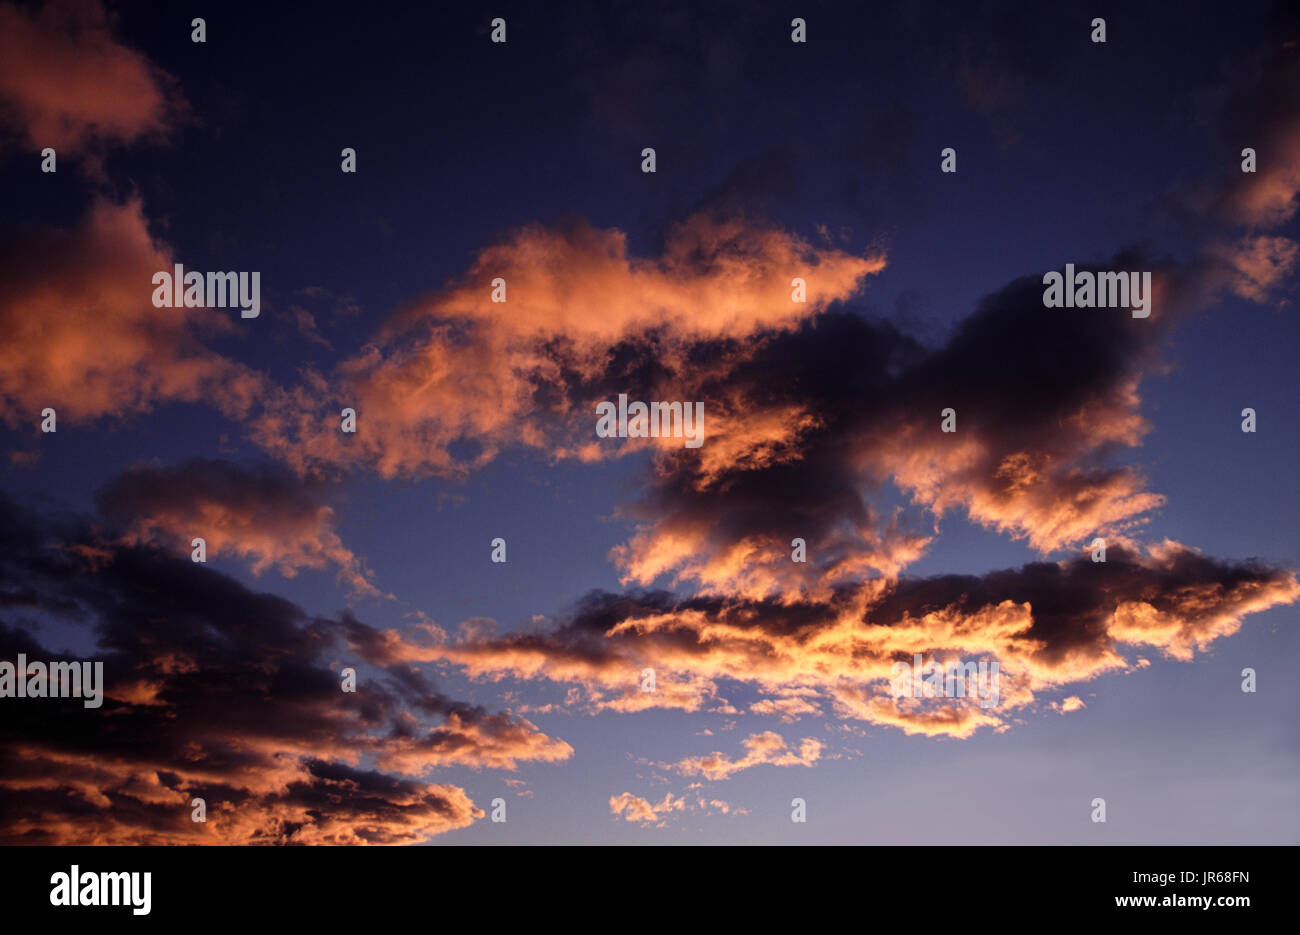 evening sky with orange-coloured clouds, could also be morning sky Stock Photo